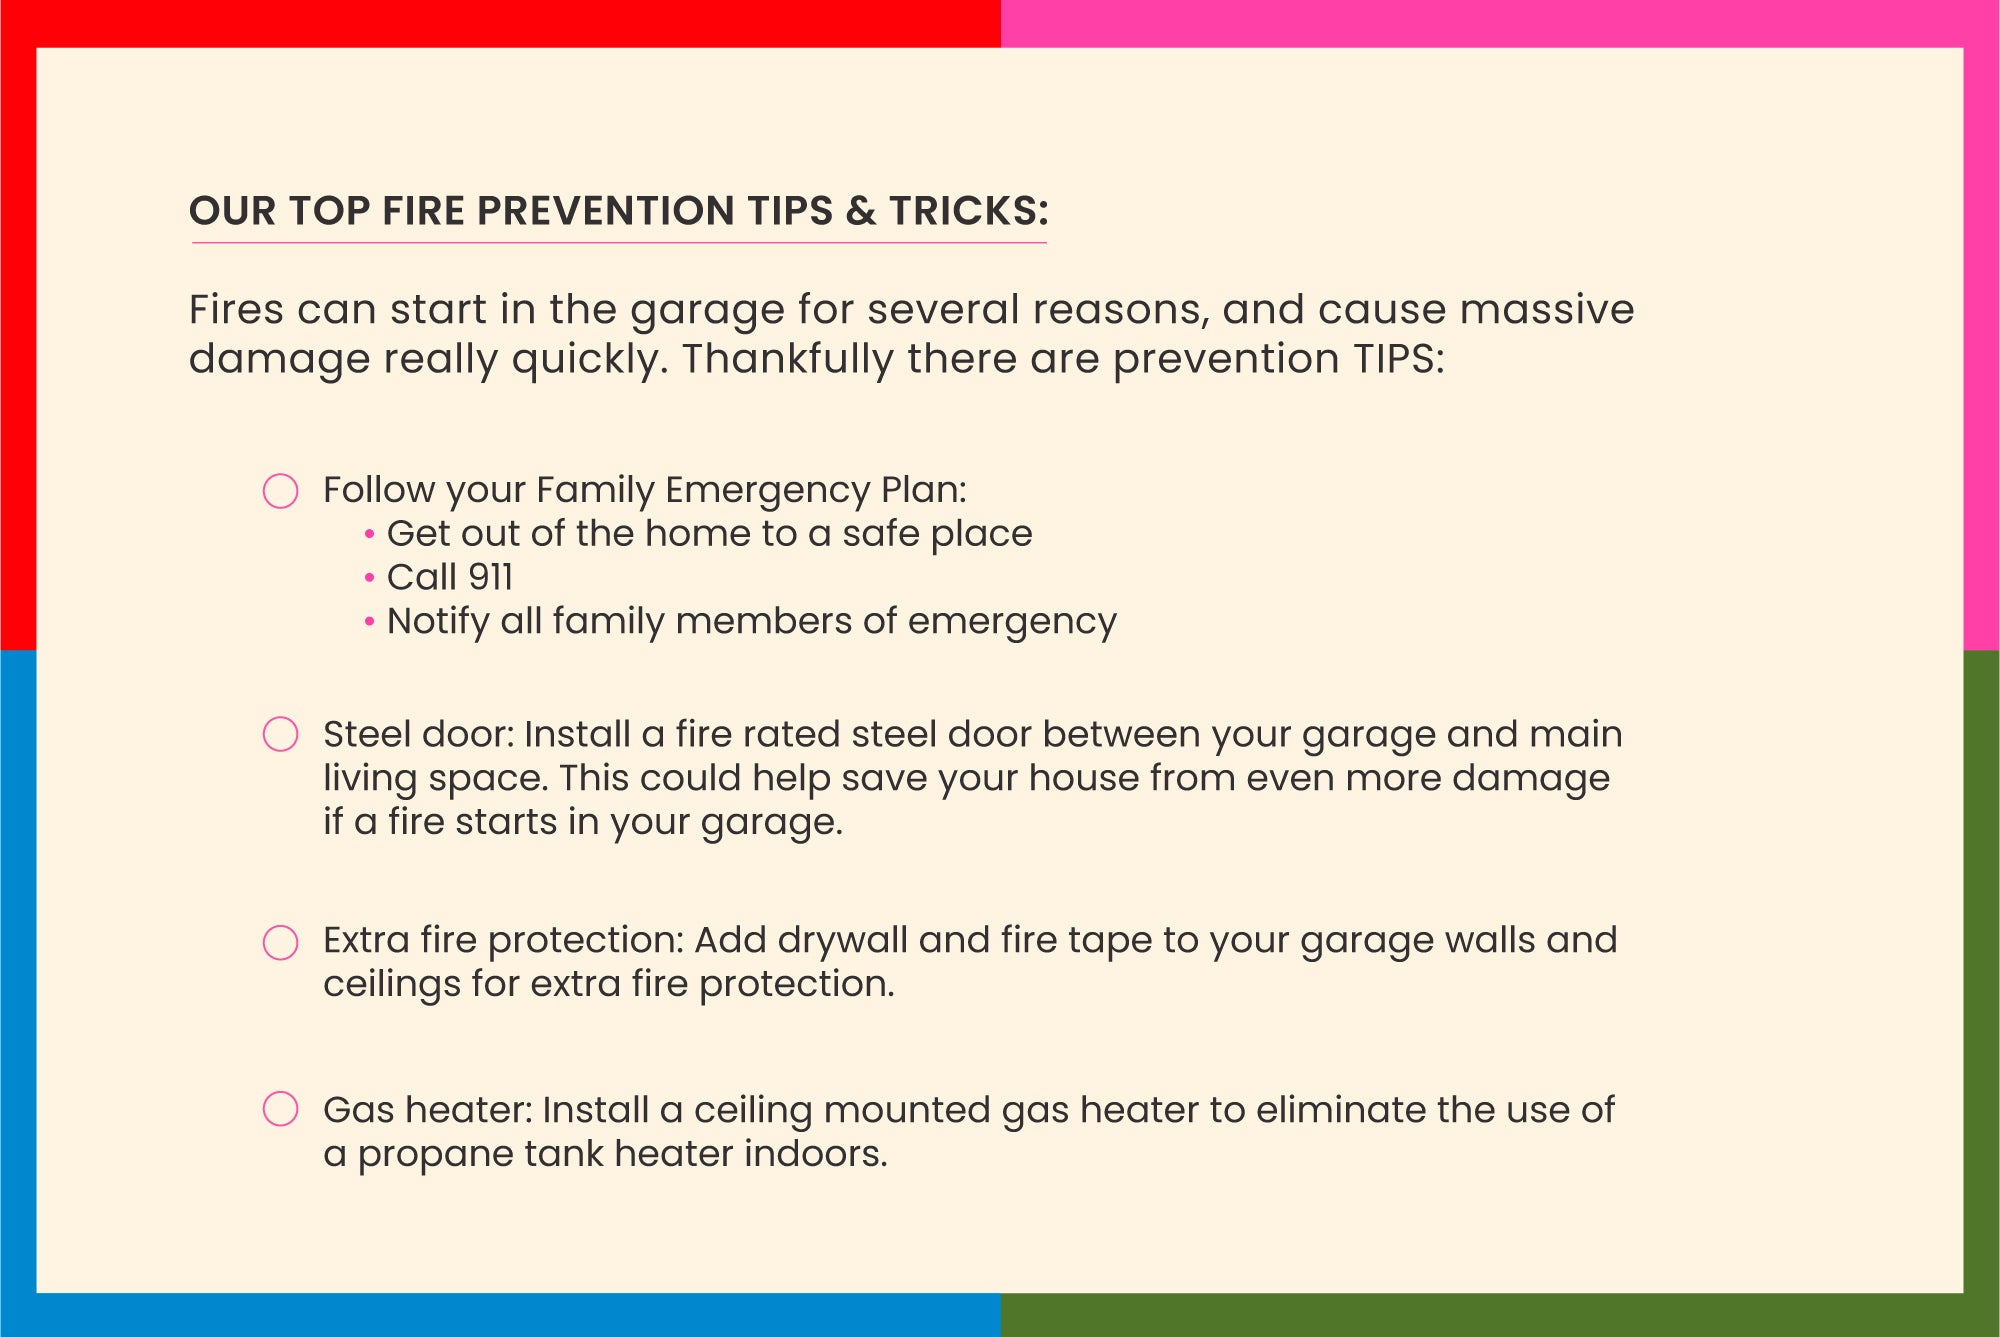 Our Top Prevention Tips and Tricks